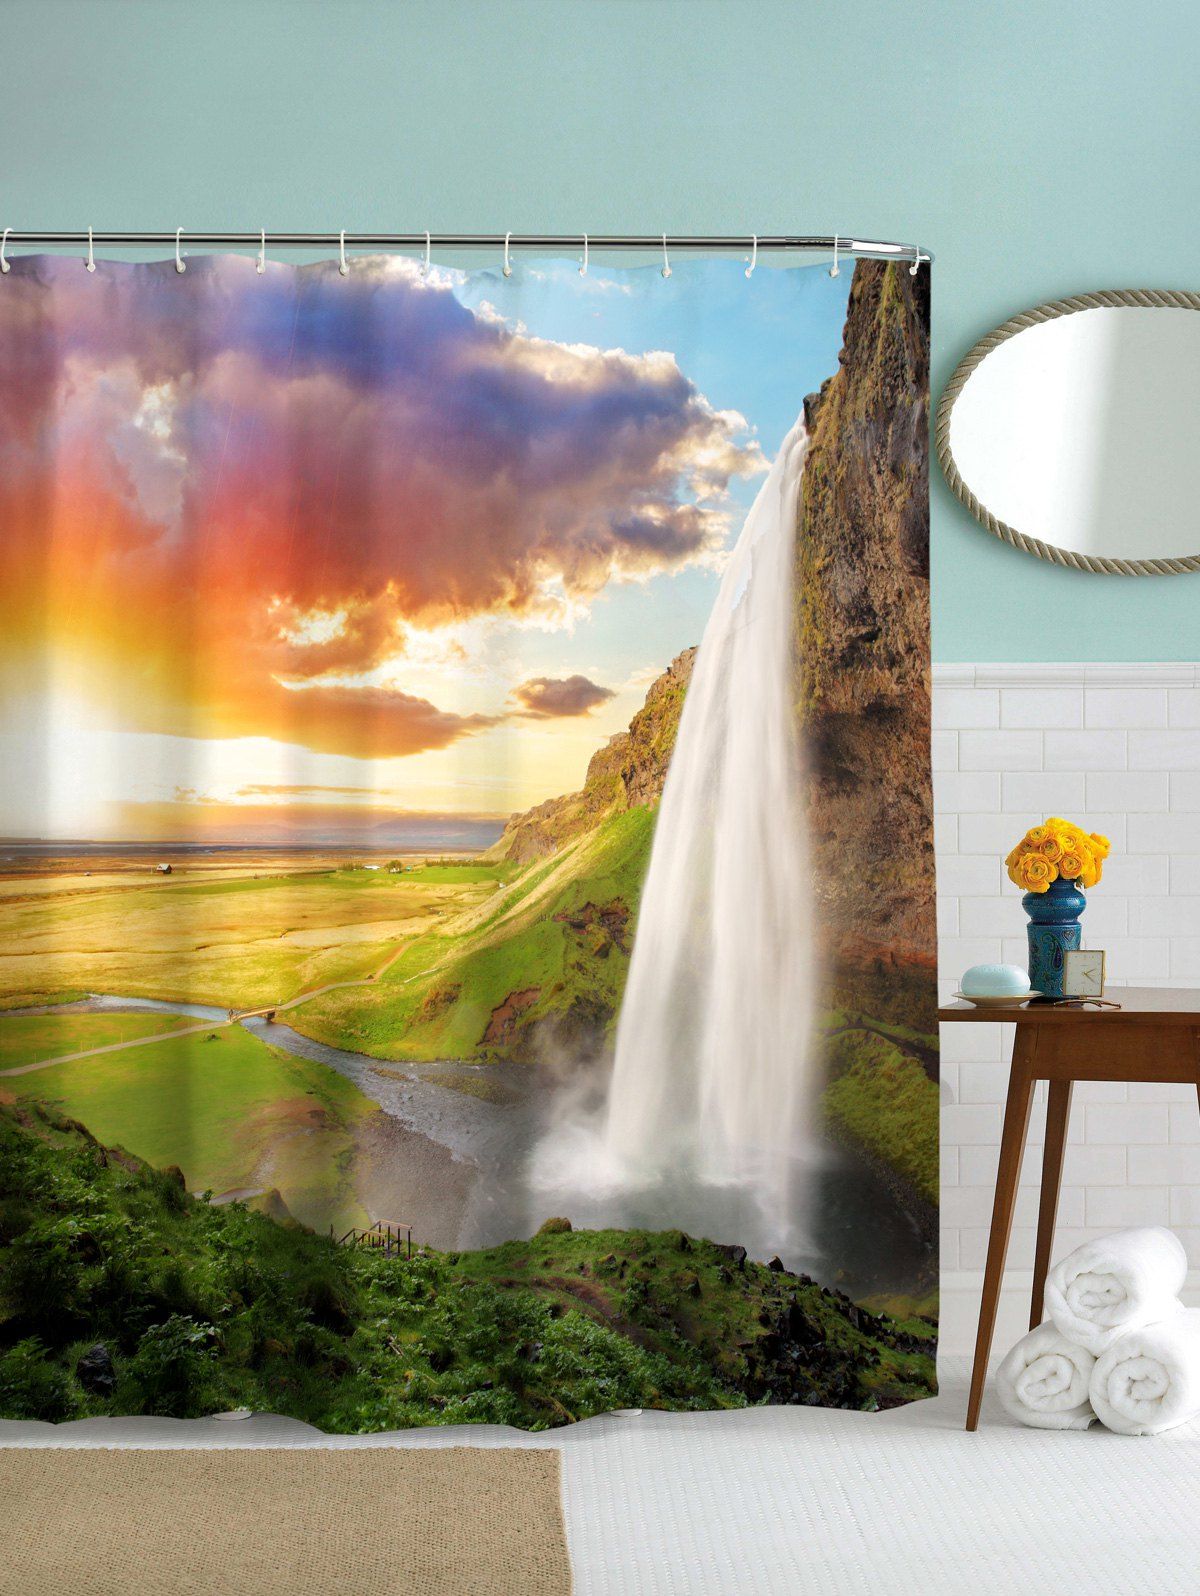 

Waterproof Mouldproof Falls Print Shower Curtain, Colormix